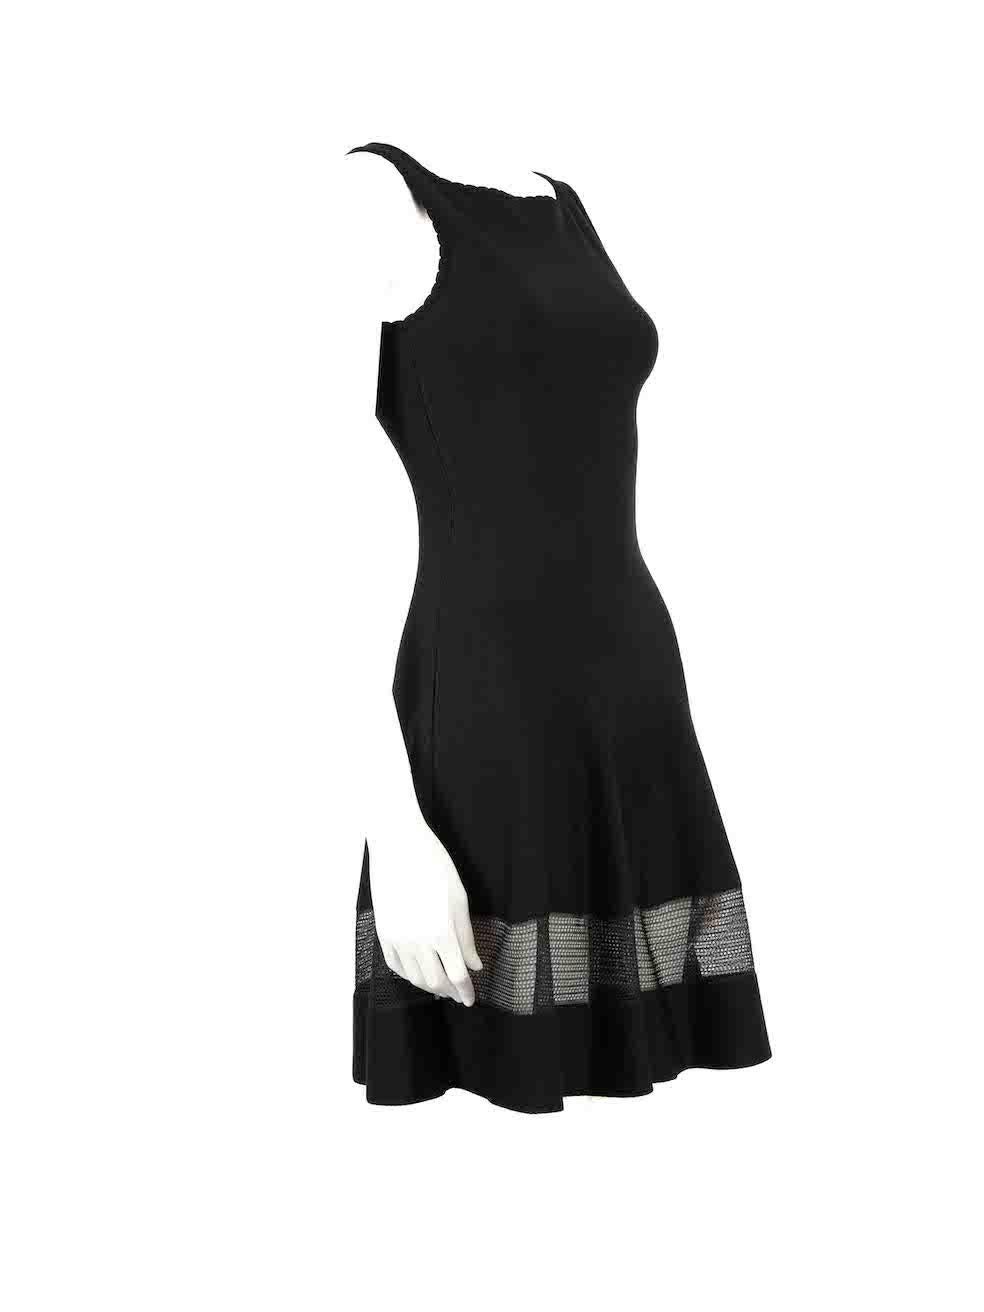 CONDITION is Never worn. No visible wear to dress is evident on this new Alaïa designer resale item.
 
 
 
 Details
 
 
 Black
 
 Viscose
 
 Dress
 
 Knee length
 
 Sleeveless
 
 Round neck
 
 Mesh panel skirt
 
 
 
 
 
 Made in Italy
 
 
 
